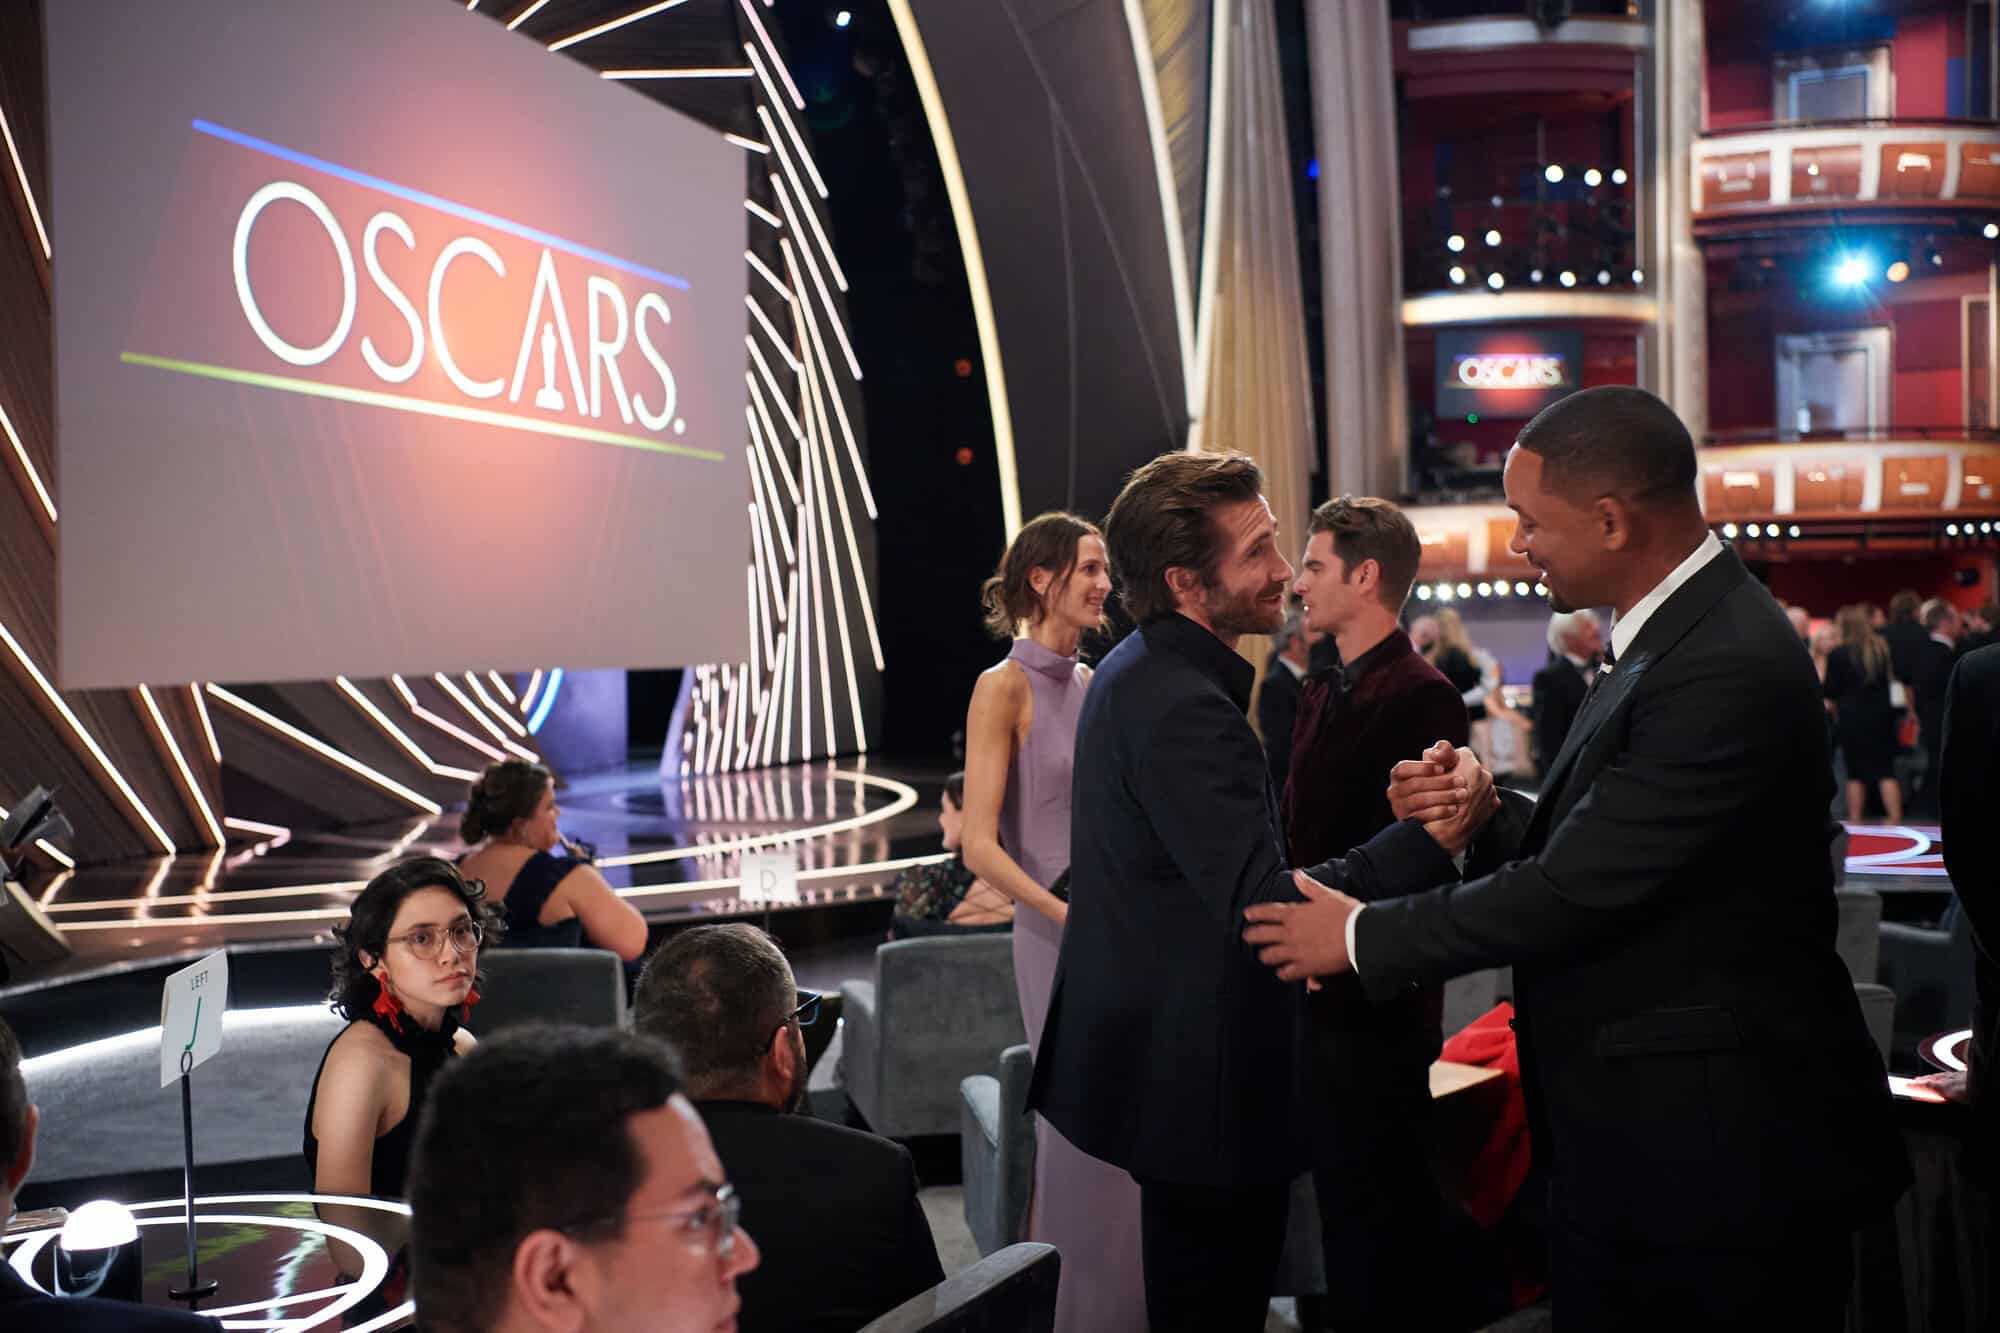 Jake and Will shaking hands in front of the Oscars stage